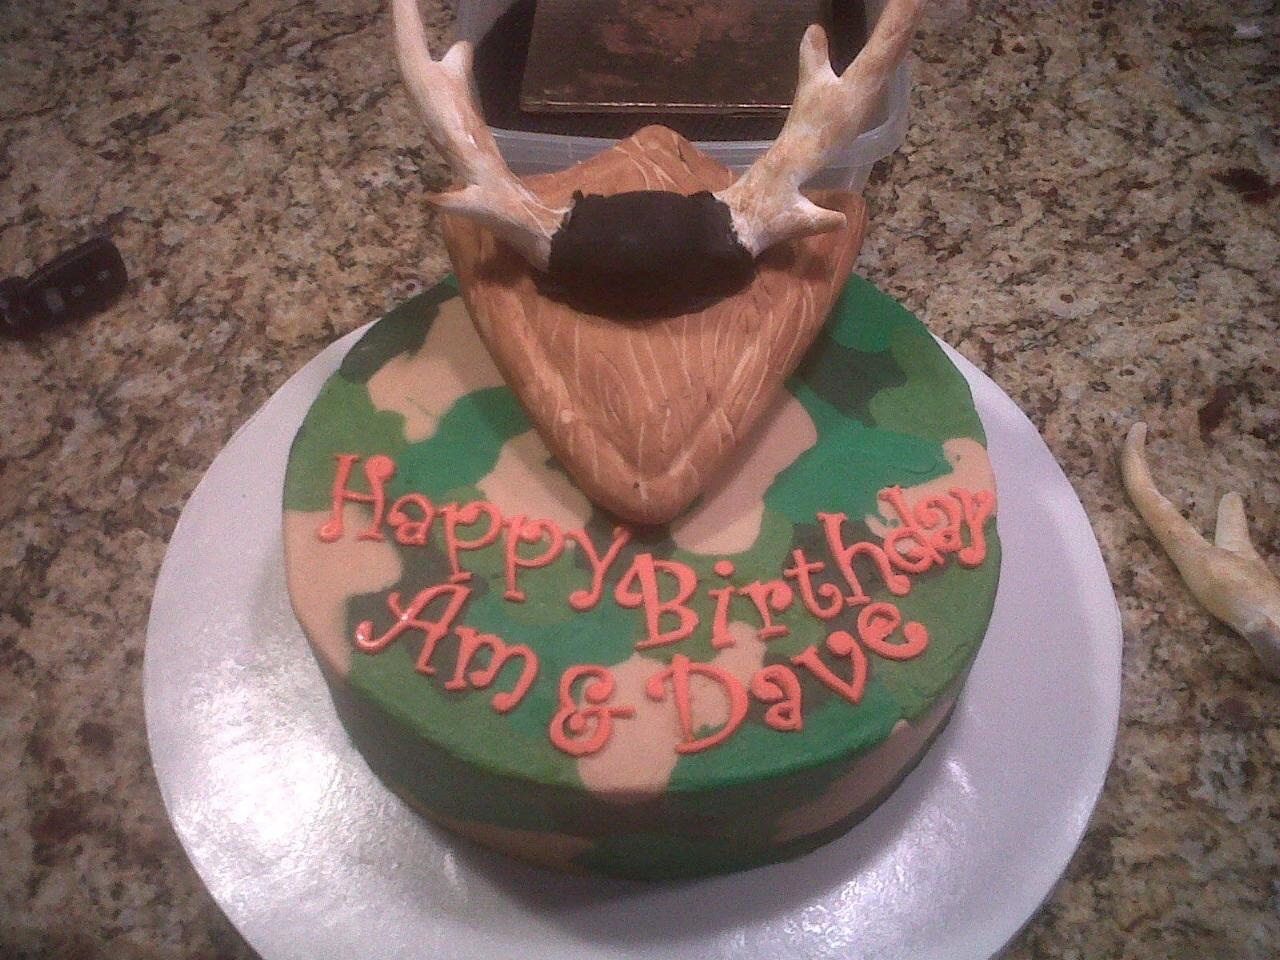 Camo cake done in buttercream technique learned on cc Rice Krispie plaque covered in fondant with gum paste antlers